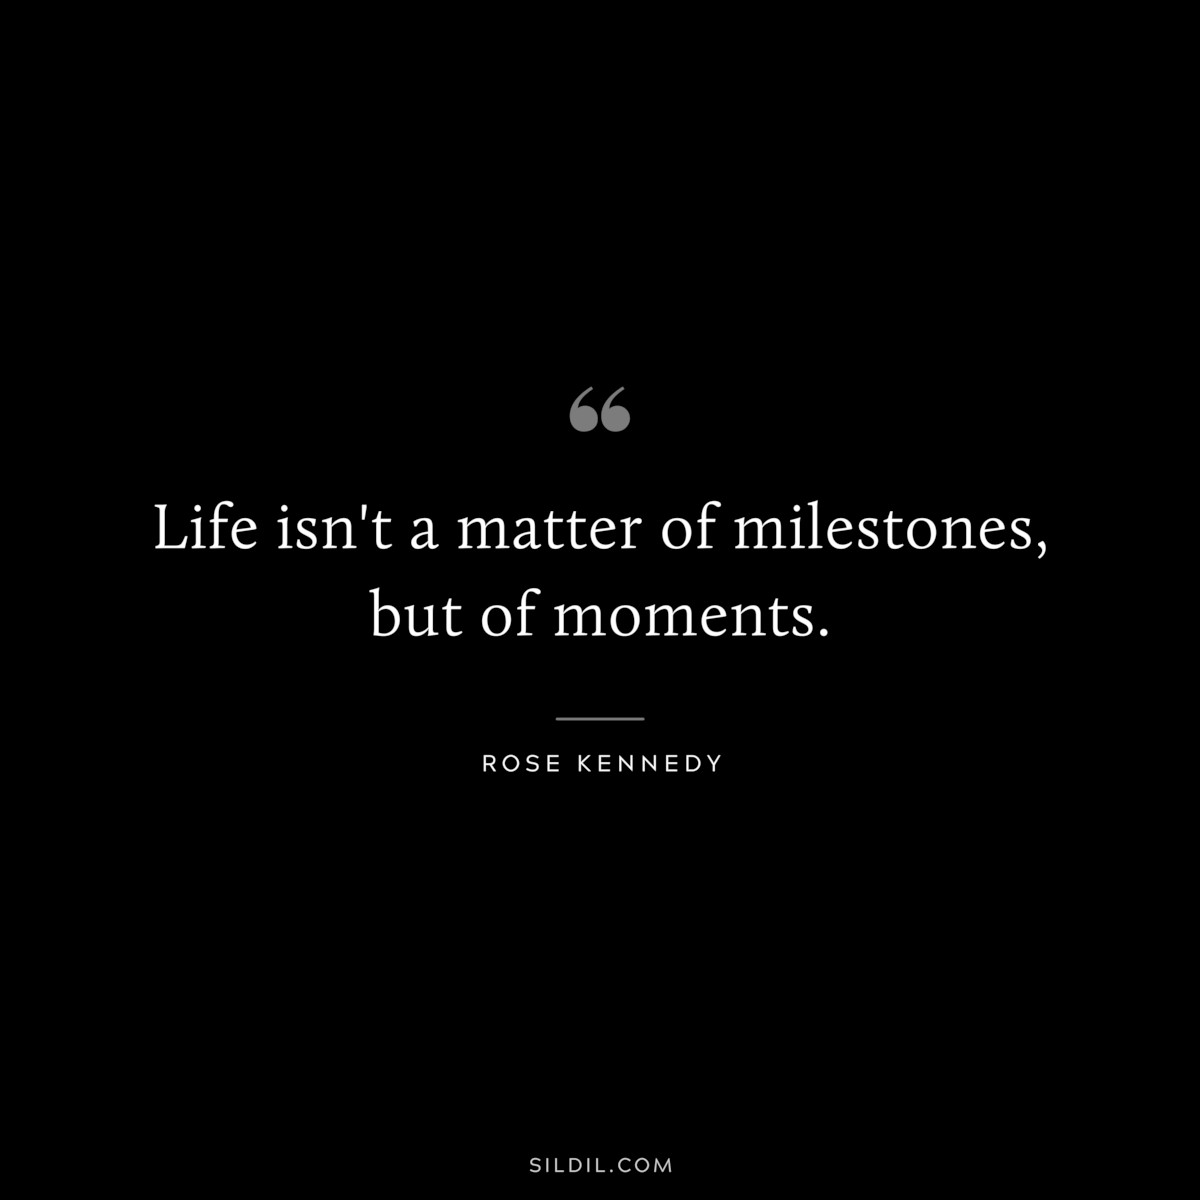 Life isn't a matter of milestones, but of moments. ― Rose Kennedy